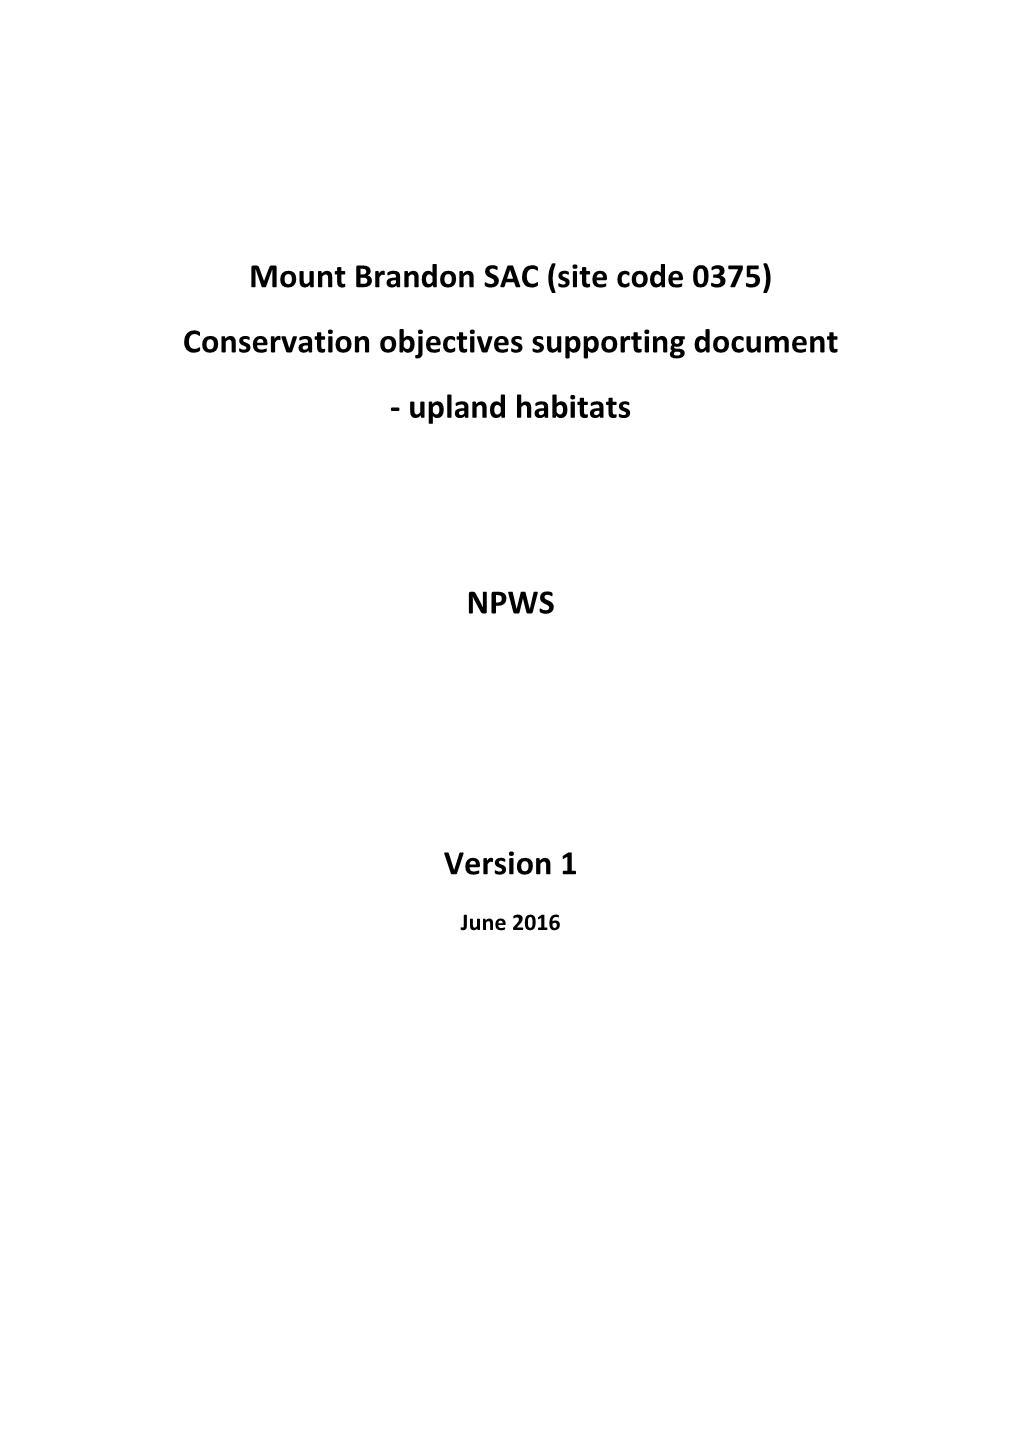 Mount Brandon SAC (Site Code 0375) Conservation Objectives Supporting Document - Upland Habitats